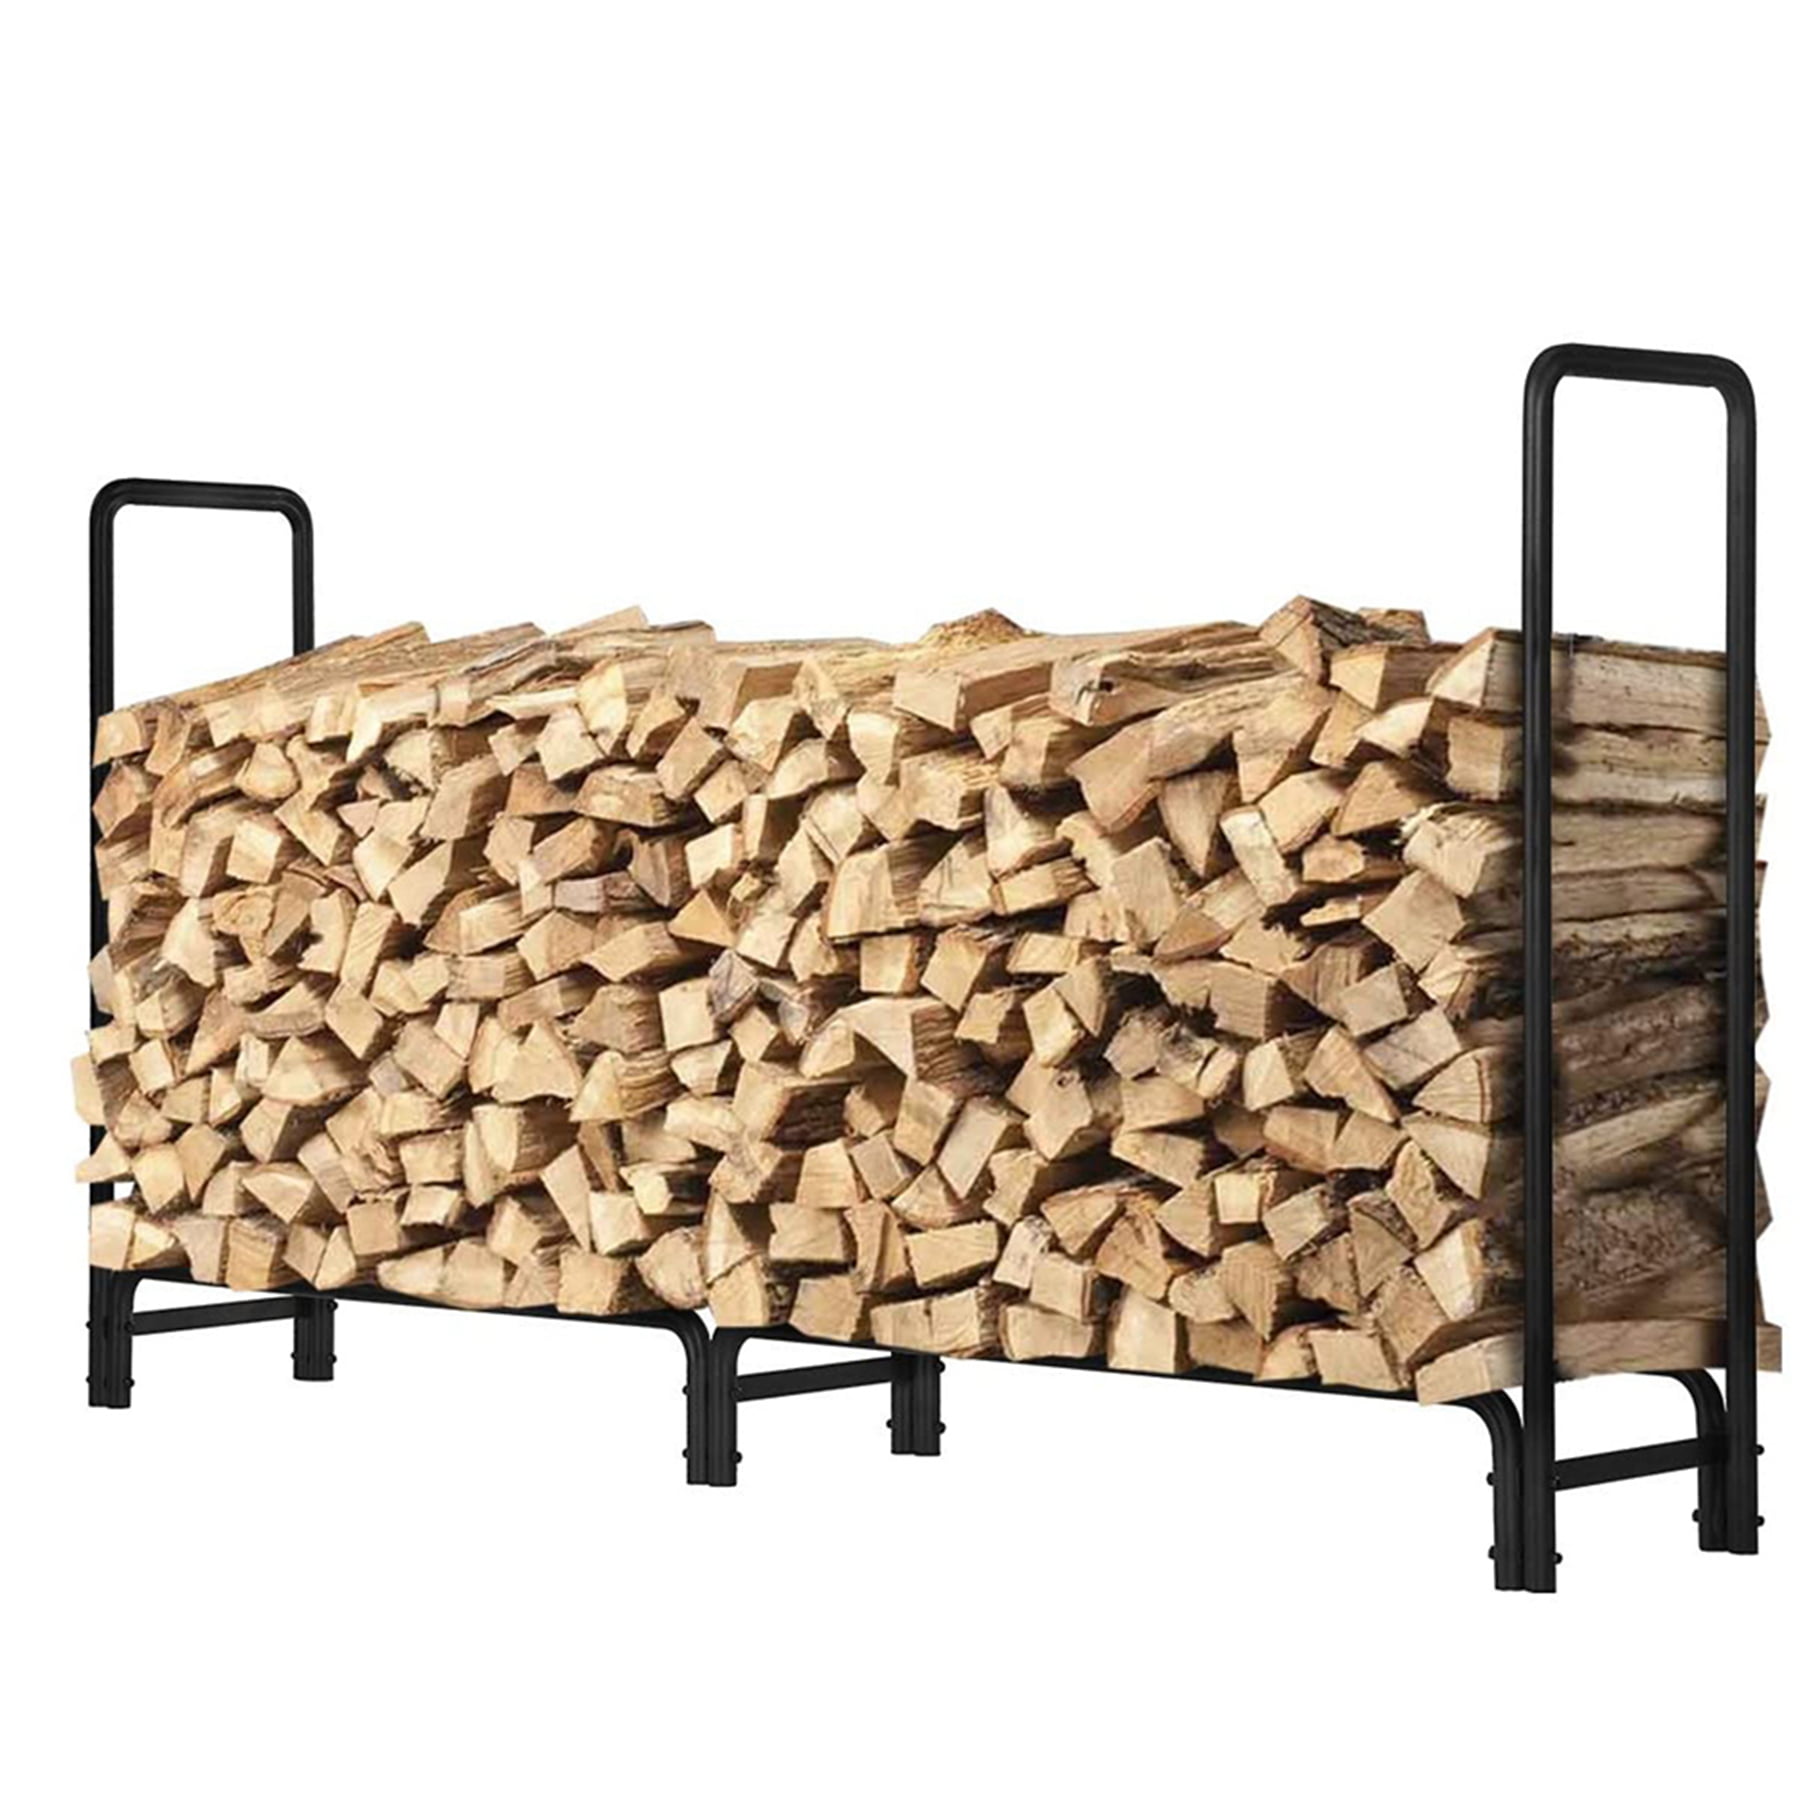 KINGSO 12ft Firewood Rack Outdoor Heavy Duty Log Rack Firewood Storage Rack Holder Steel Tubular Easy Assemble Fire Wood Rack for Patio Deck Adjustable Log Storage Stand for Outdoor Fireplace Tool 